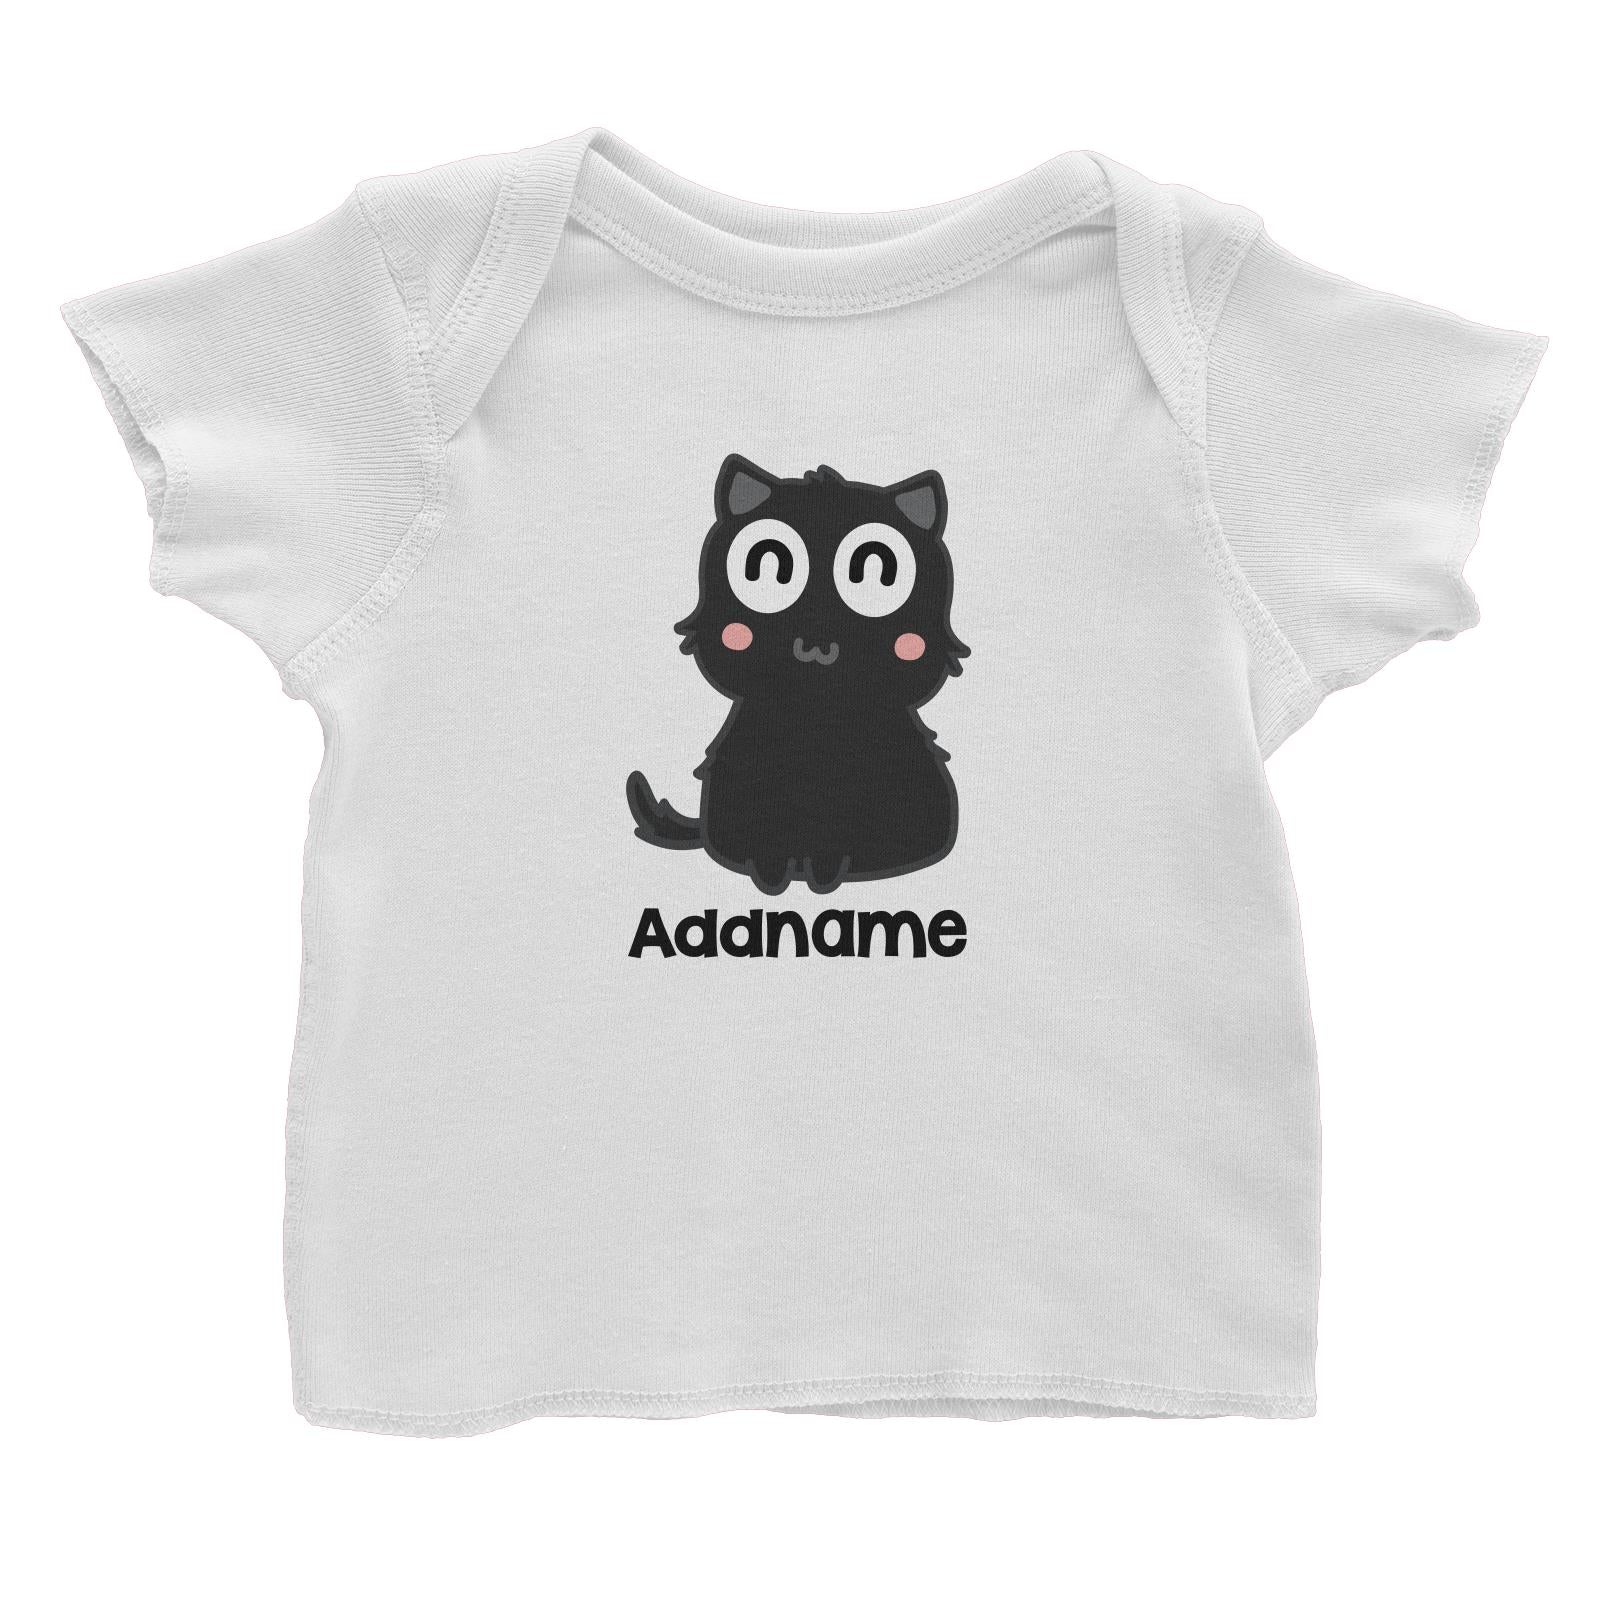 Drawn Adorable Cats Black Addname Baby T-Shirt